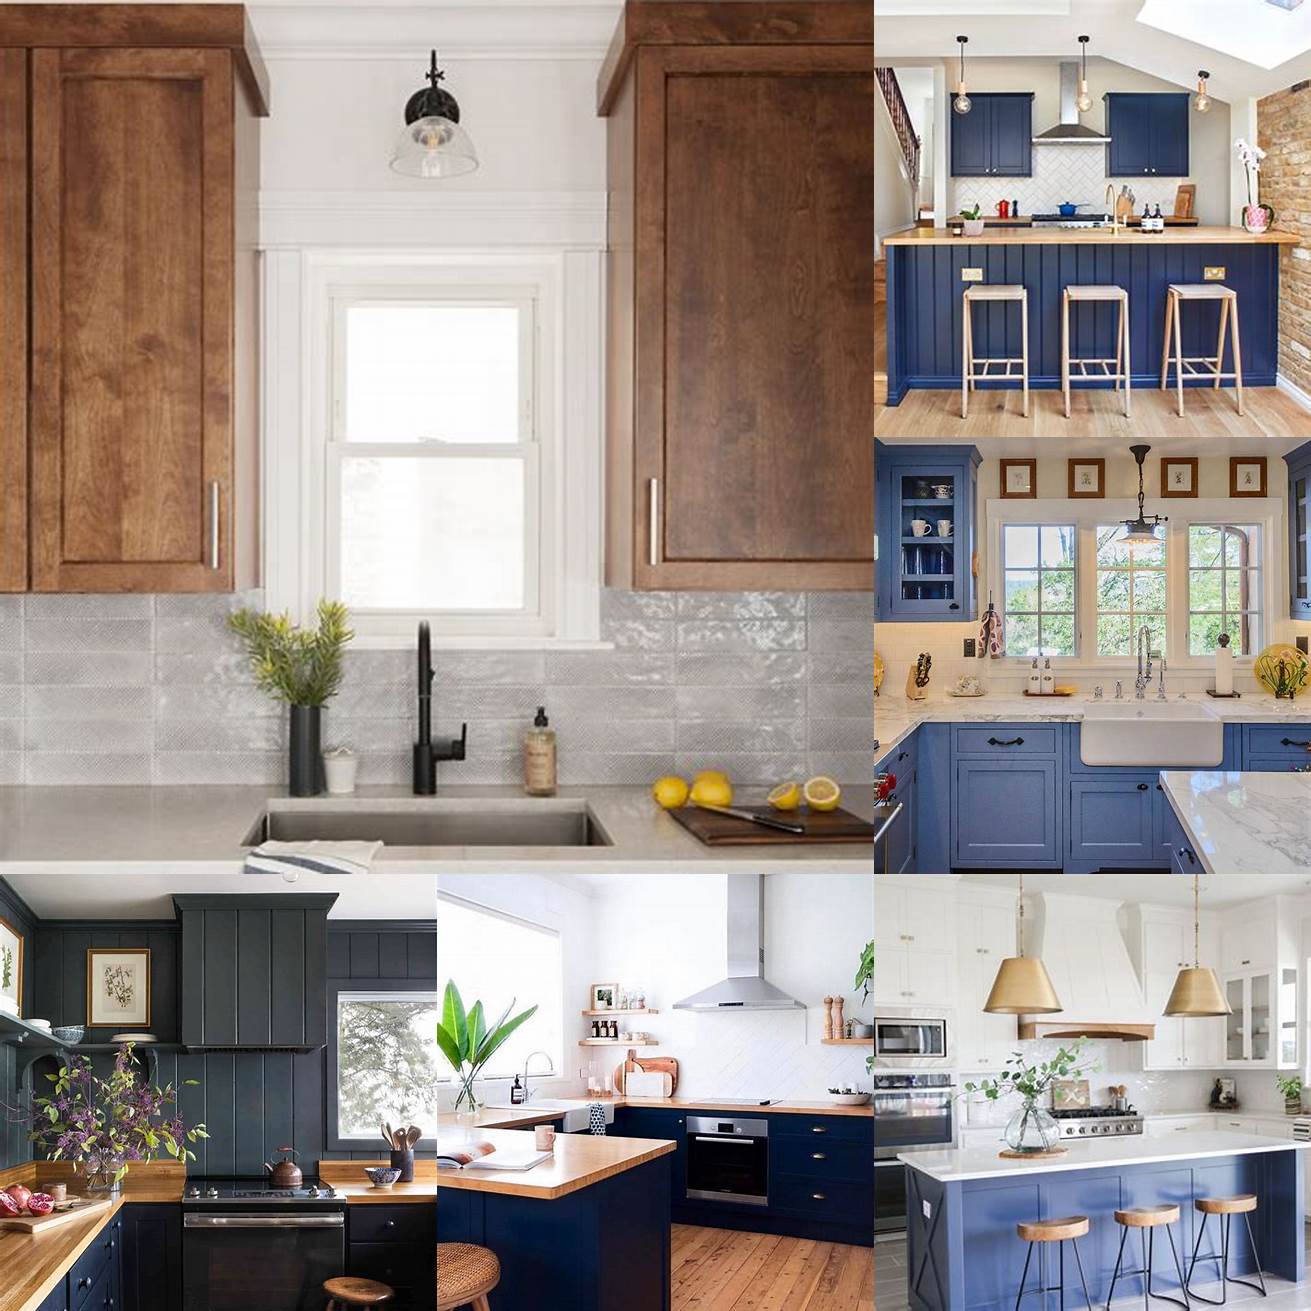 Blue and wood kitchen